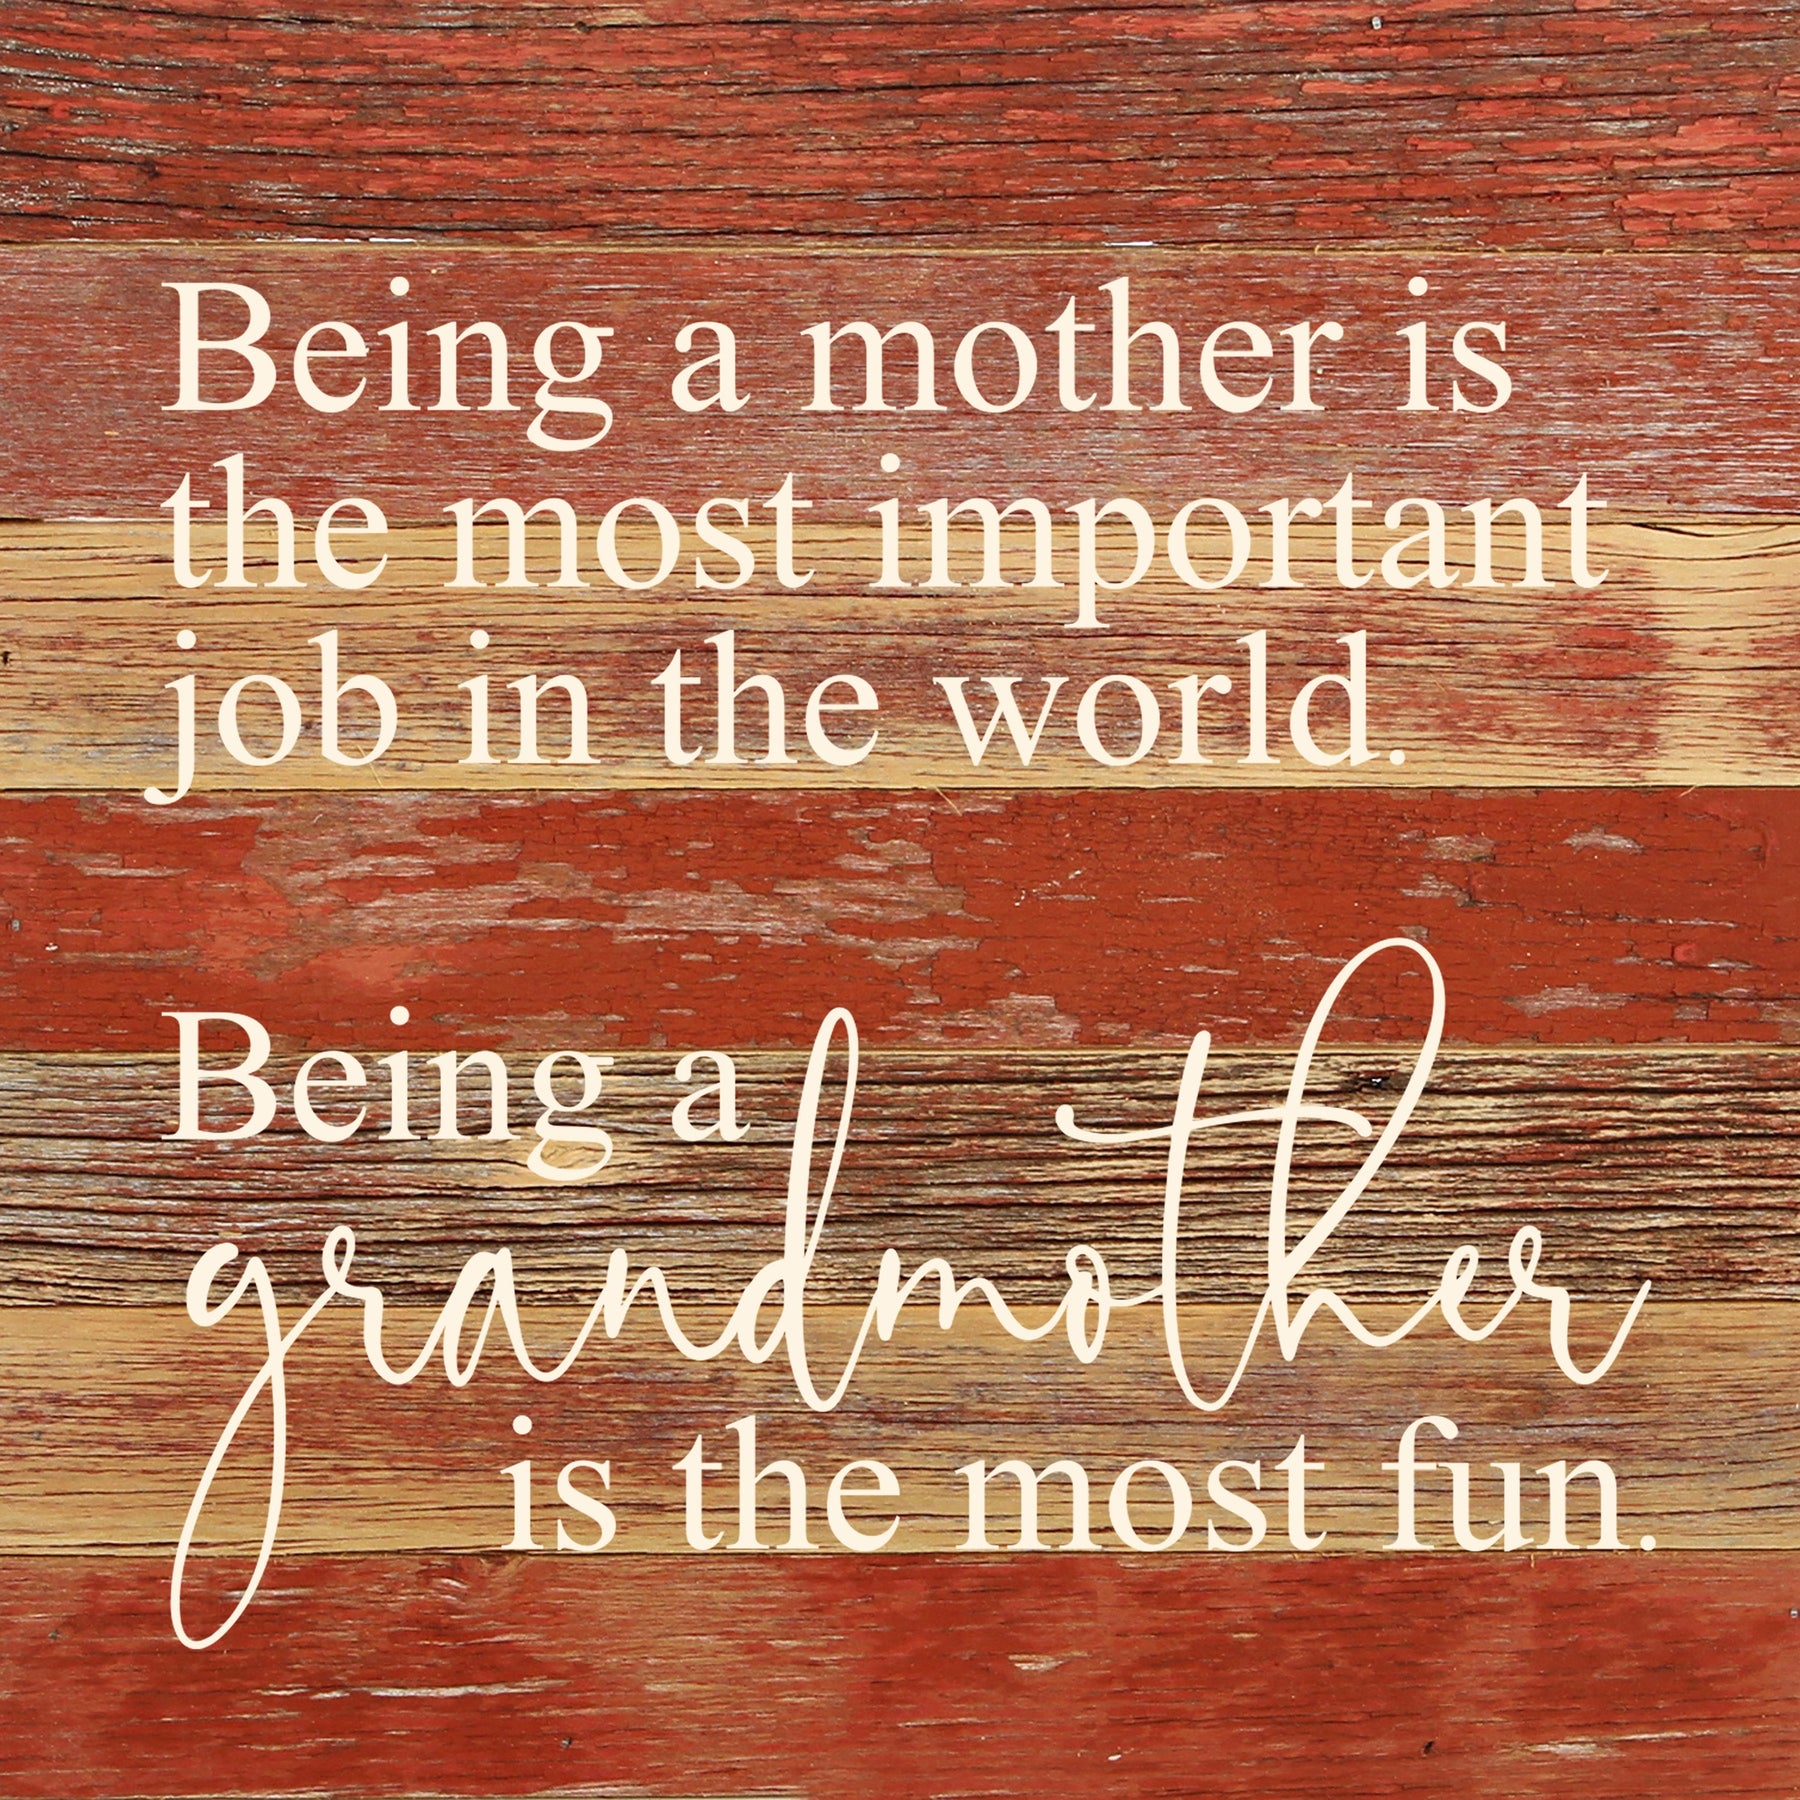 Being a mother is the most important job in the world. Being a grandmother is the most fun. / 10"x10" Reclaimed Wood Sign